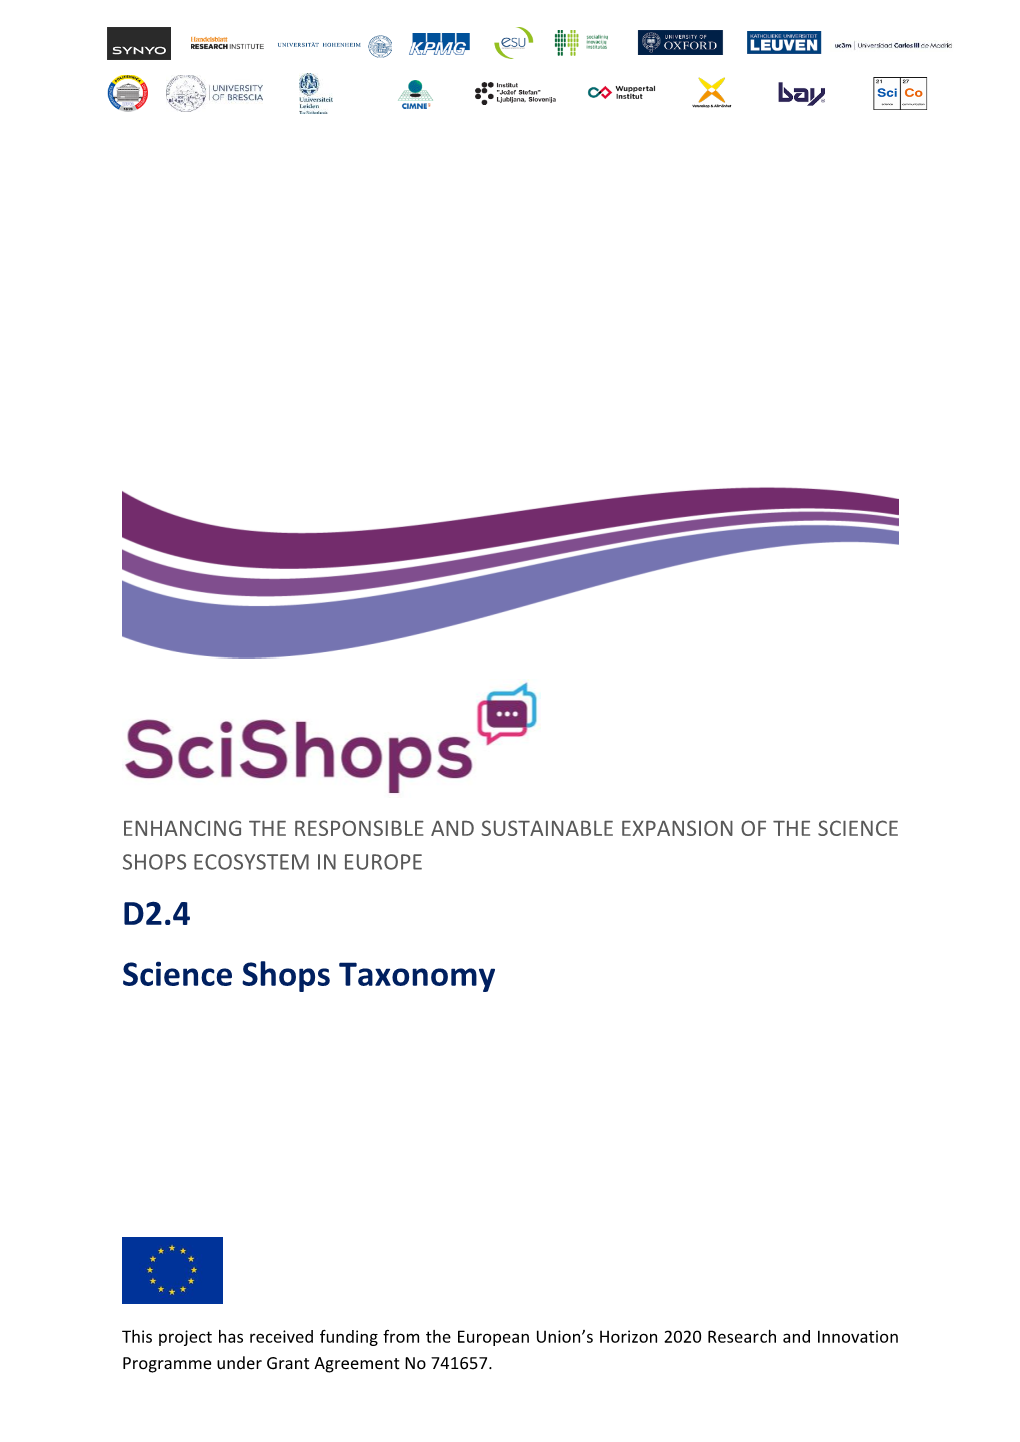 D2.4 Science Shops Taxonomy